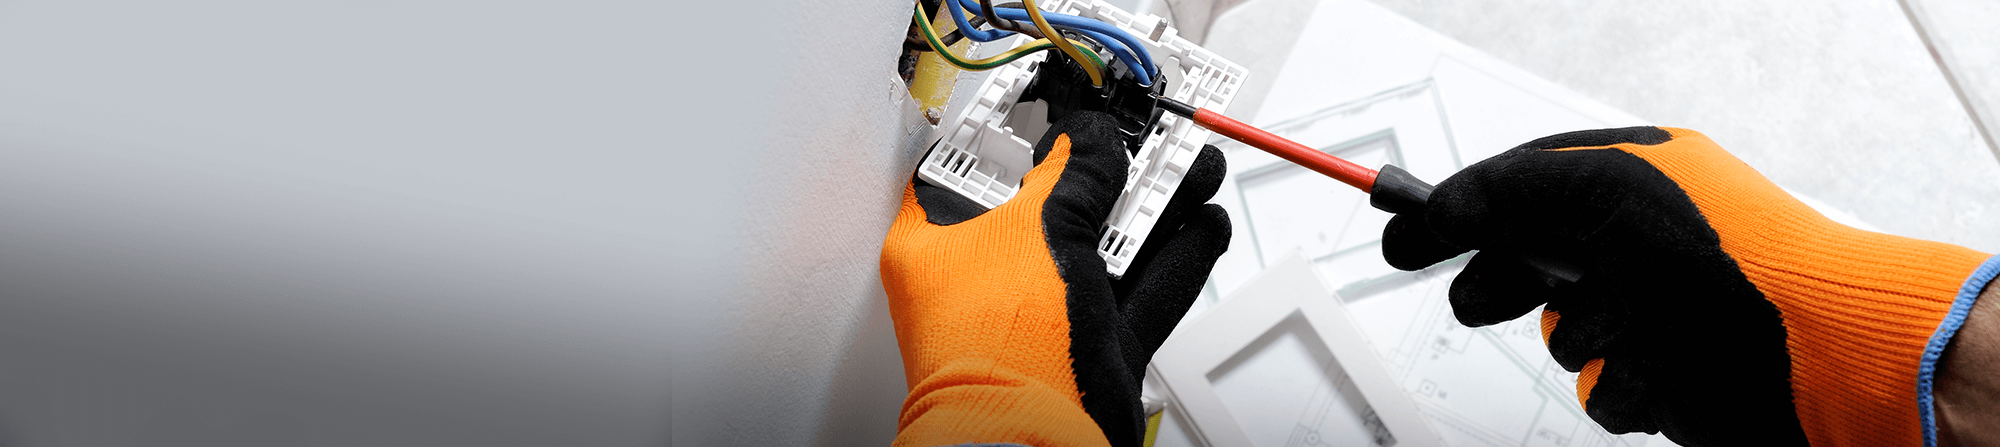 Residential electrical upgrades for your home